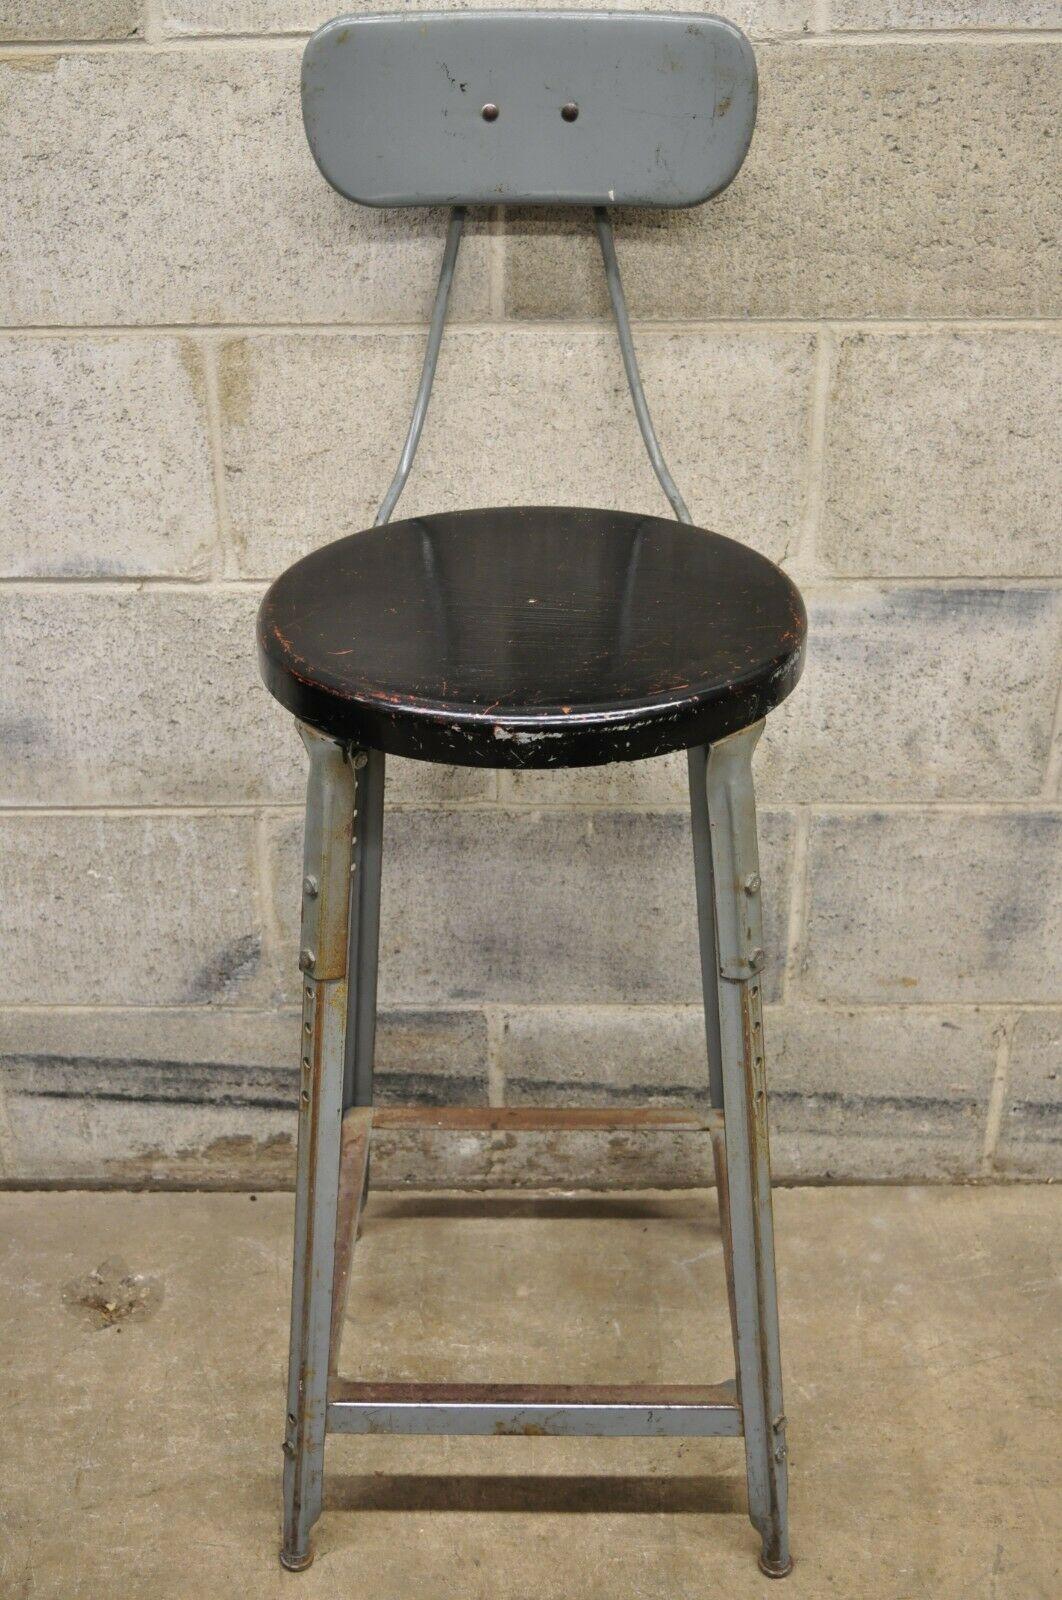 Antique American Industrial Gray Metal Drafting Stool Artist Work Chair. Item features adjustable height, black painted metal round seat, metal frame, distressed finish, very nice vintage item, quality American craftsmanship, great style and form.